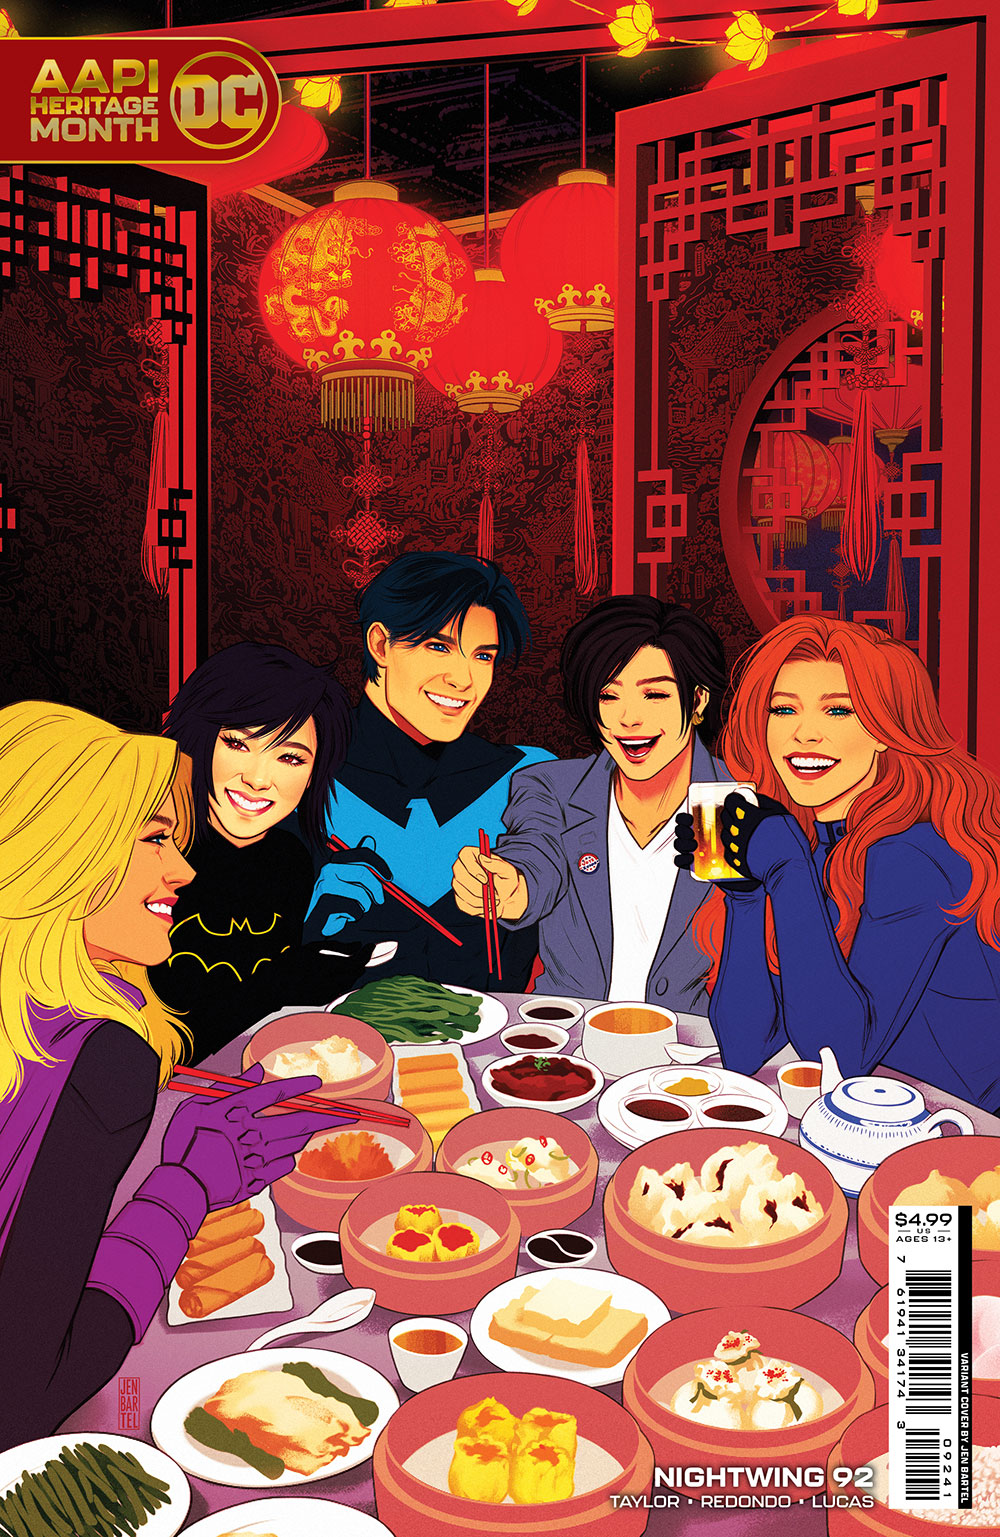 Nightwing #92 Cover C Jen Bartel Aapi Card Stock Variant (2016)